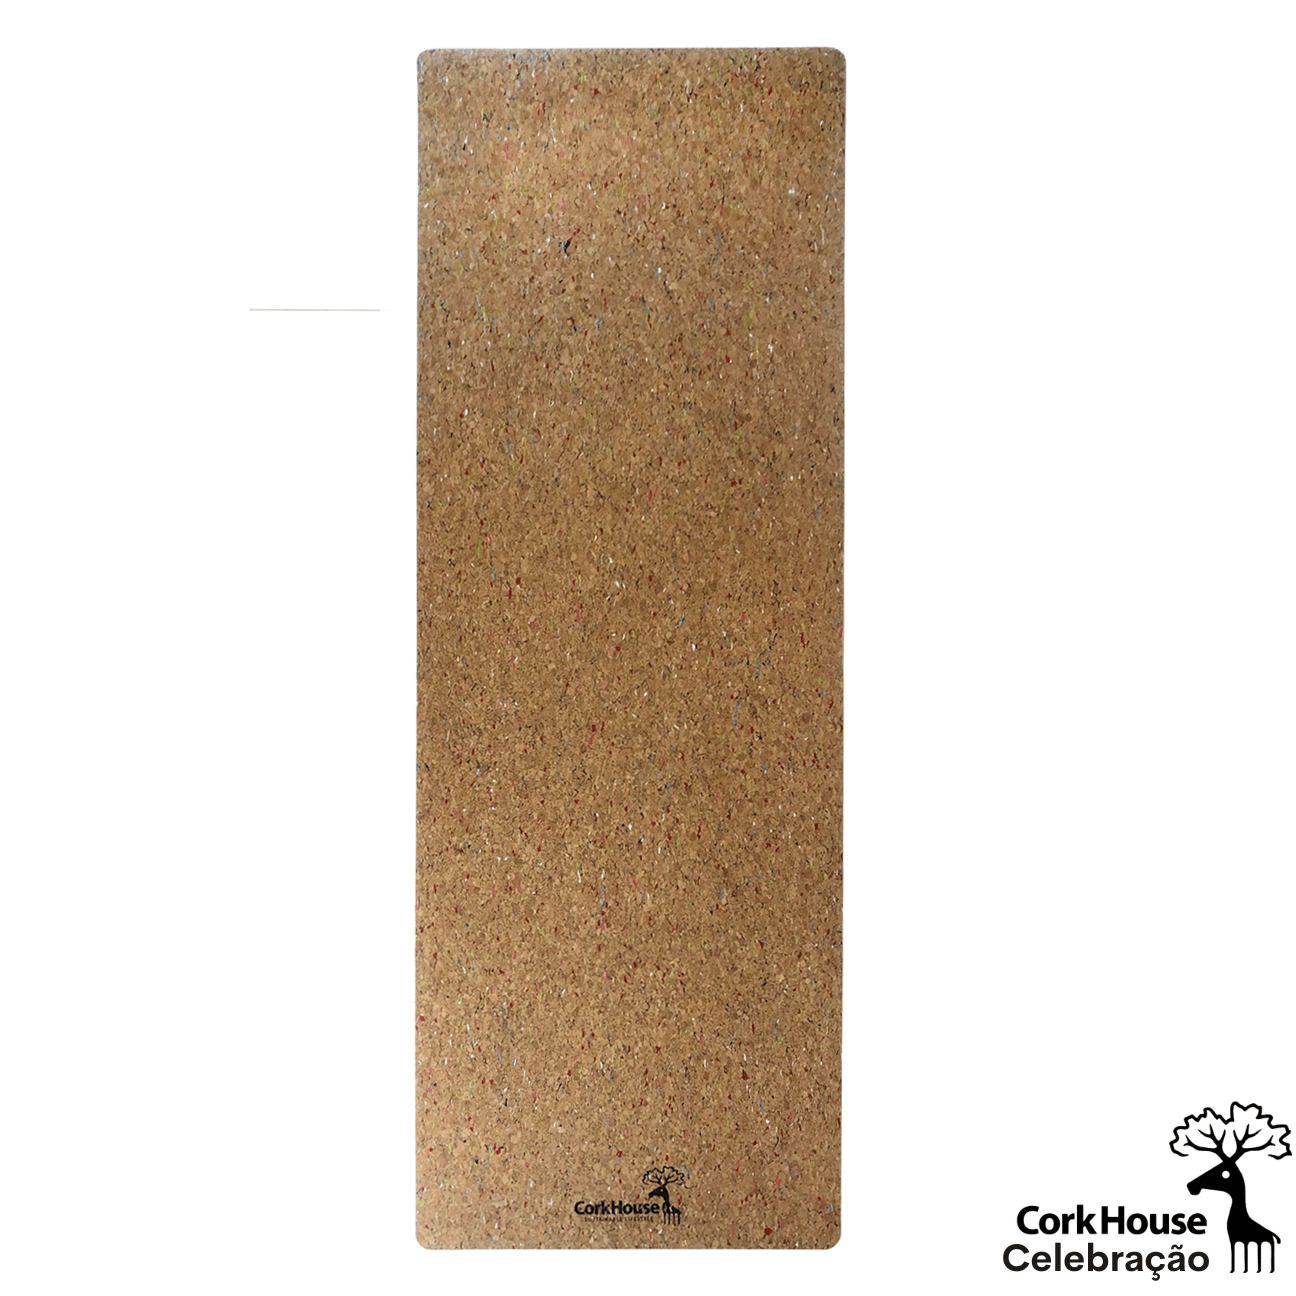 Are Cork Yoga Mats Durable? How Long Do They Last?